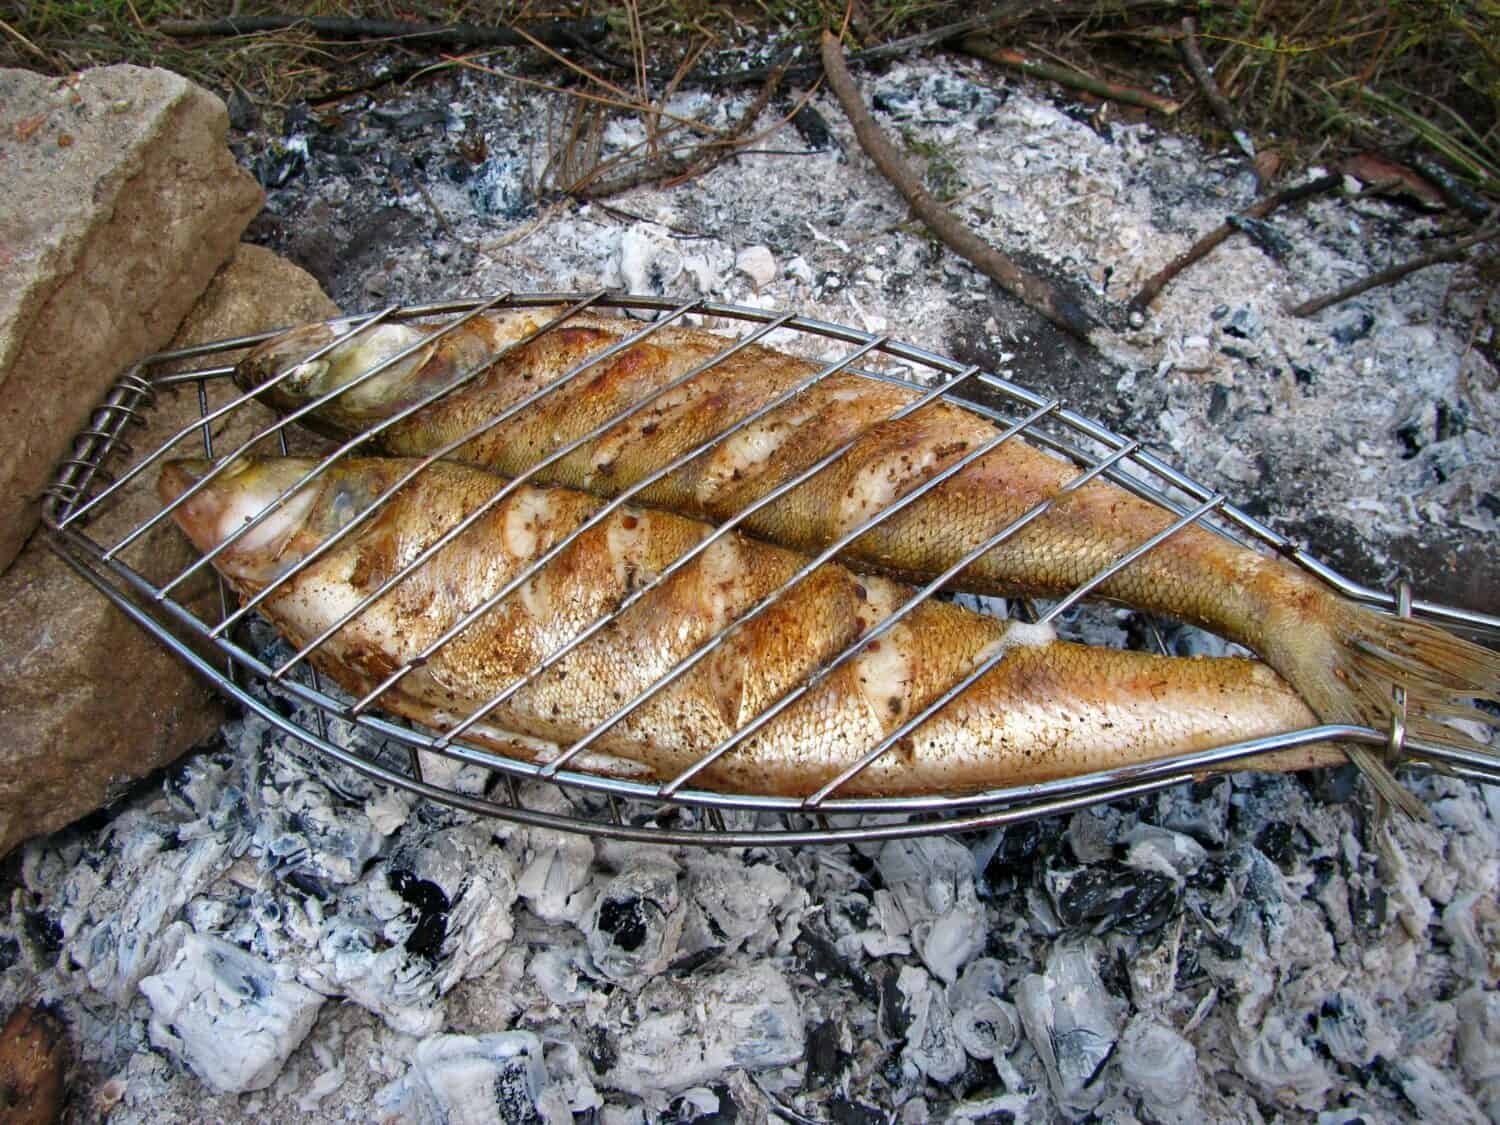 Fish walleye cooked in the coals of the fire.